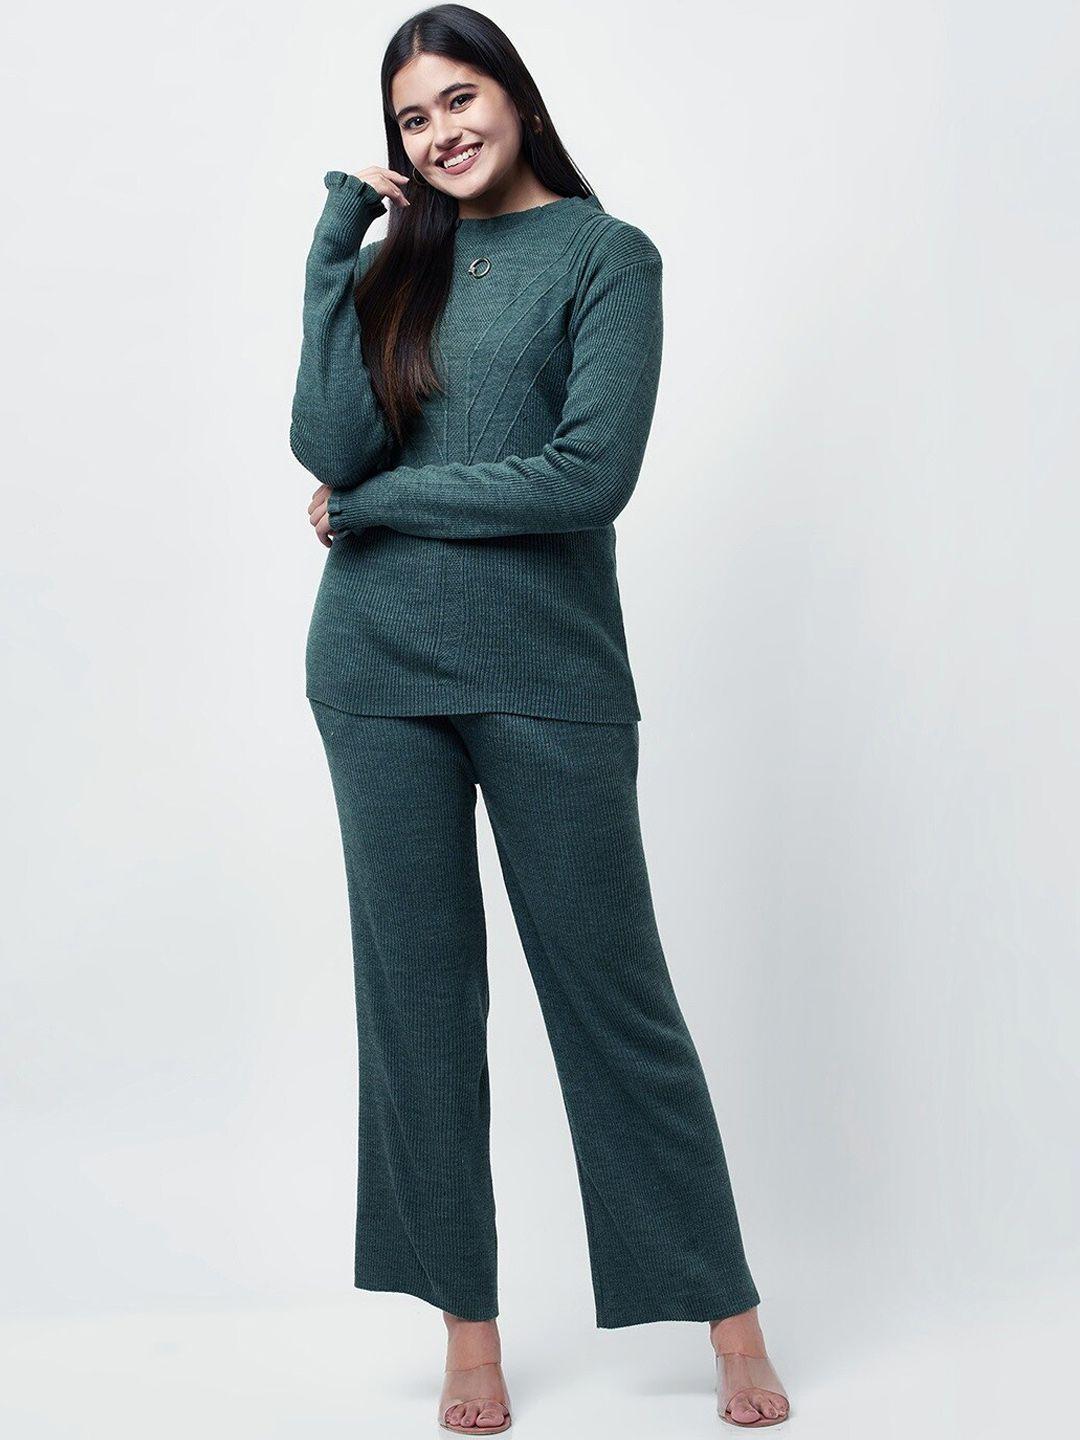 knitstudio self design knitted casual sweater & trousers co-ords